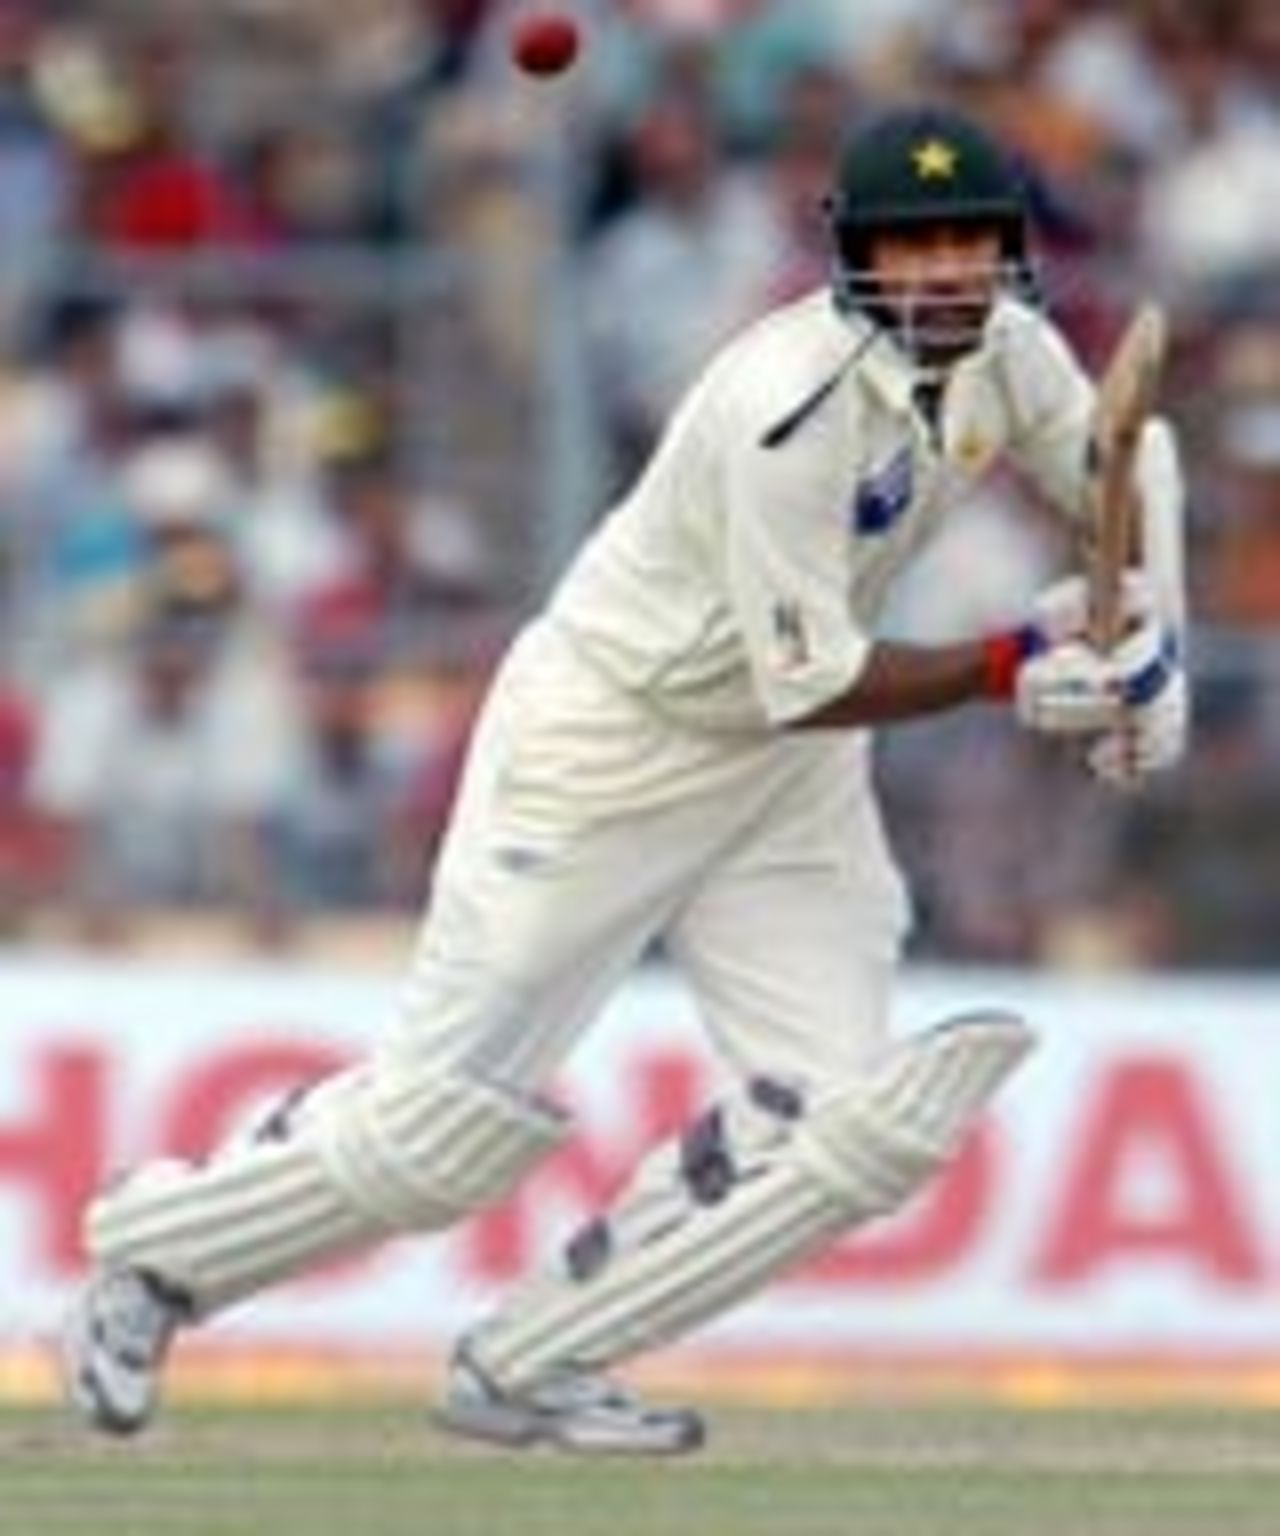 Yousuf Youhana eases one on the off side, India v Pakistan, 2nd Test, Kolkata, March 17, 2005